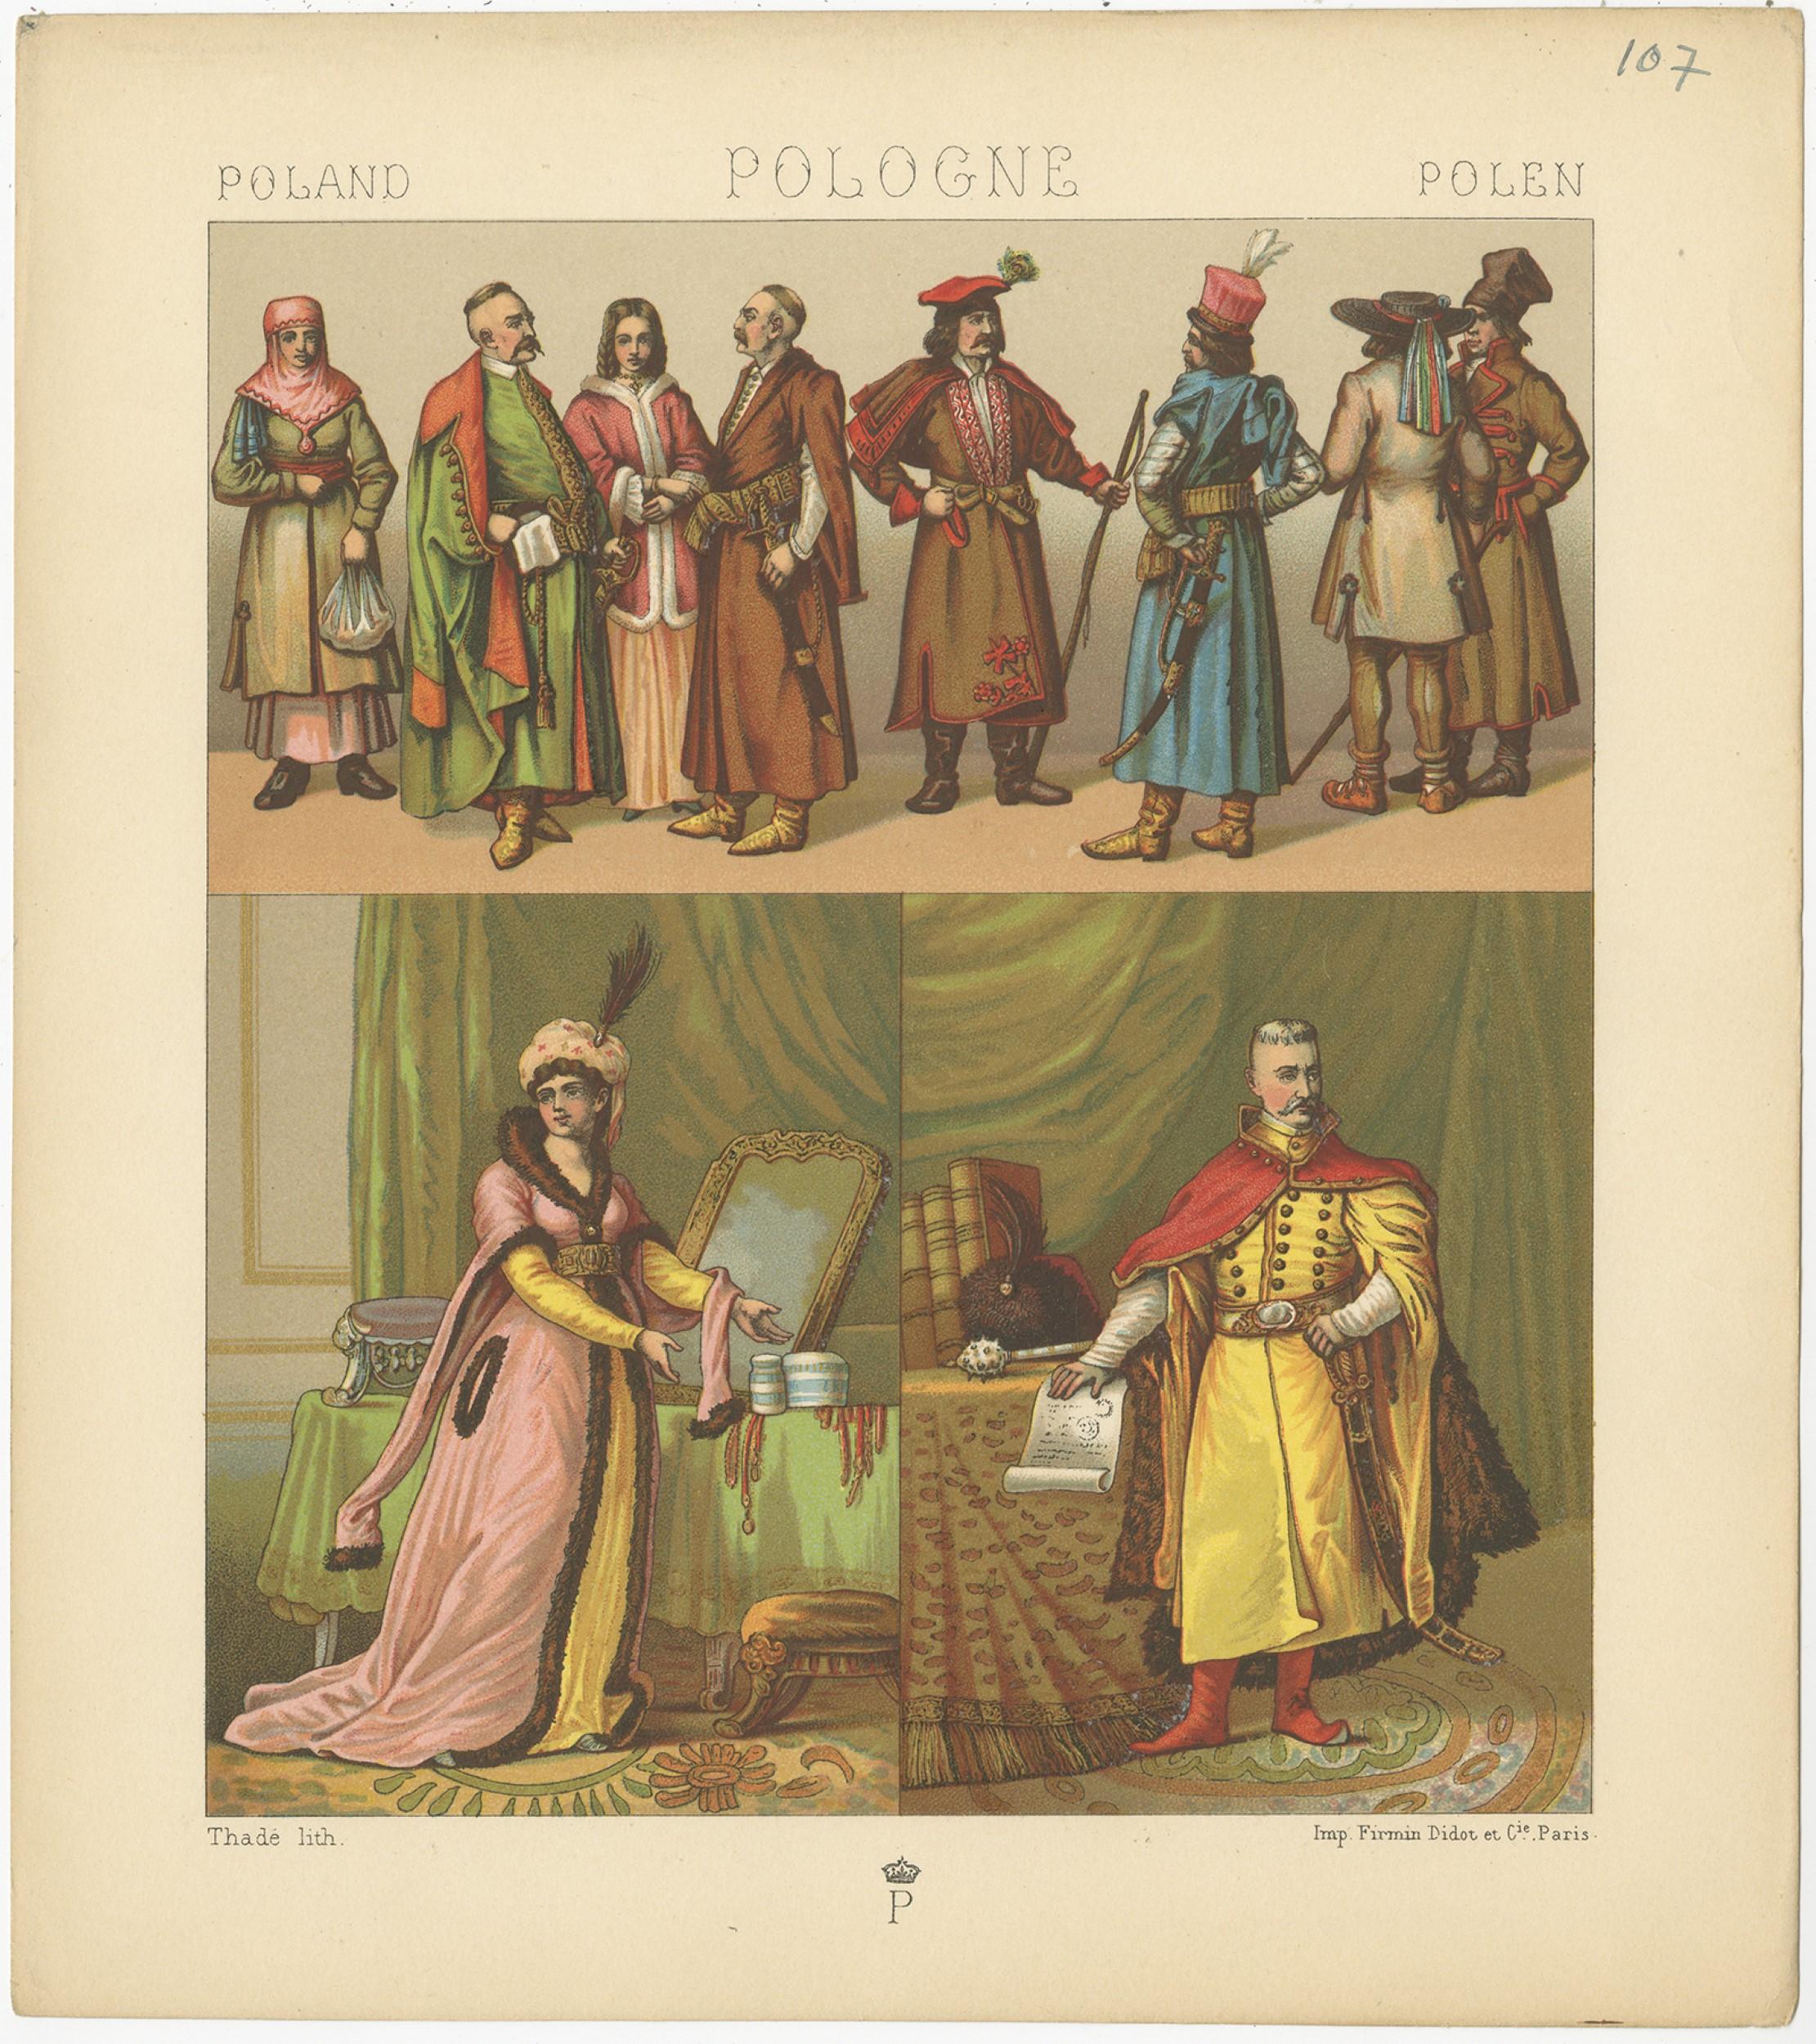 Antique print titled 'Poland - Pologne - Polen'. Chromolithograph of Polish Costumes. This print originates from 'Le Costume Historique' by M.A. Racinet. Published, circa 1880.